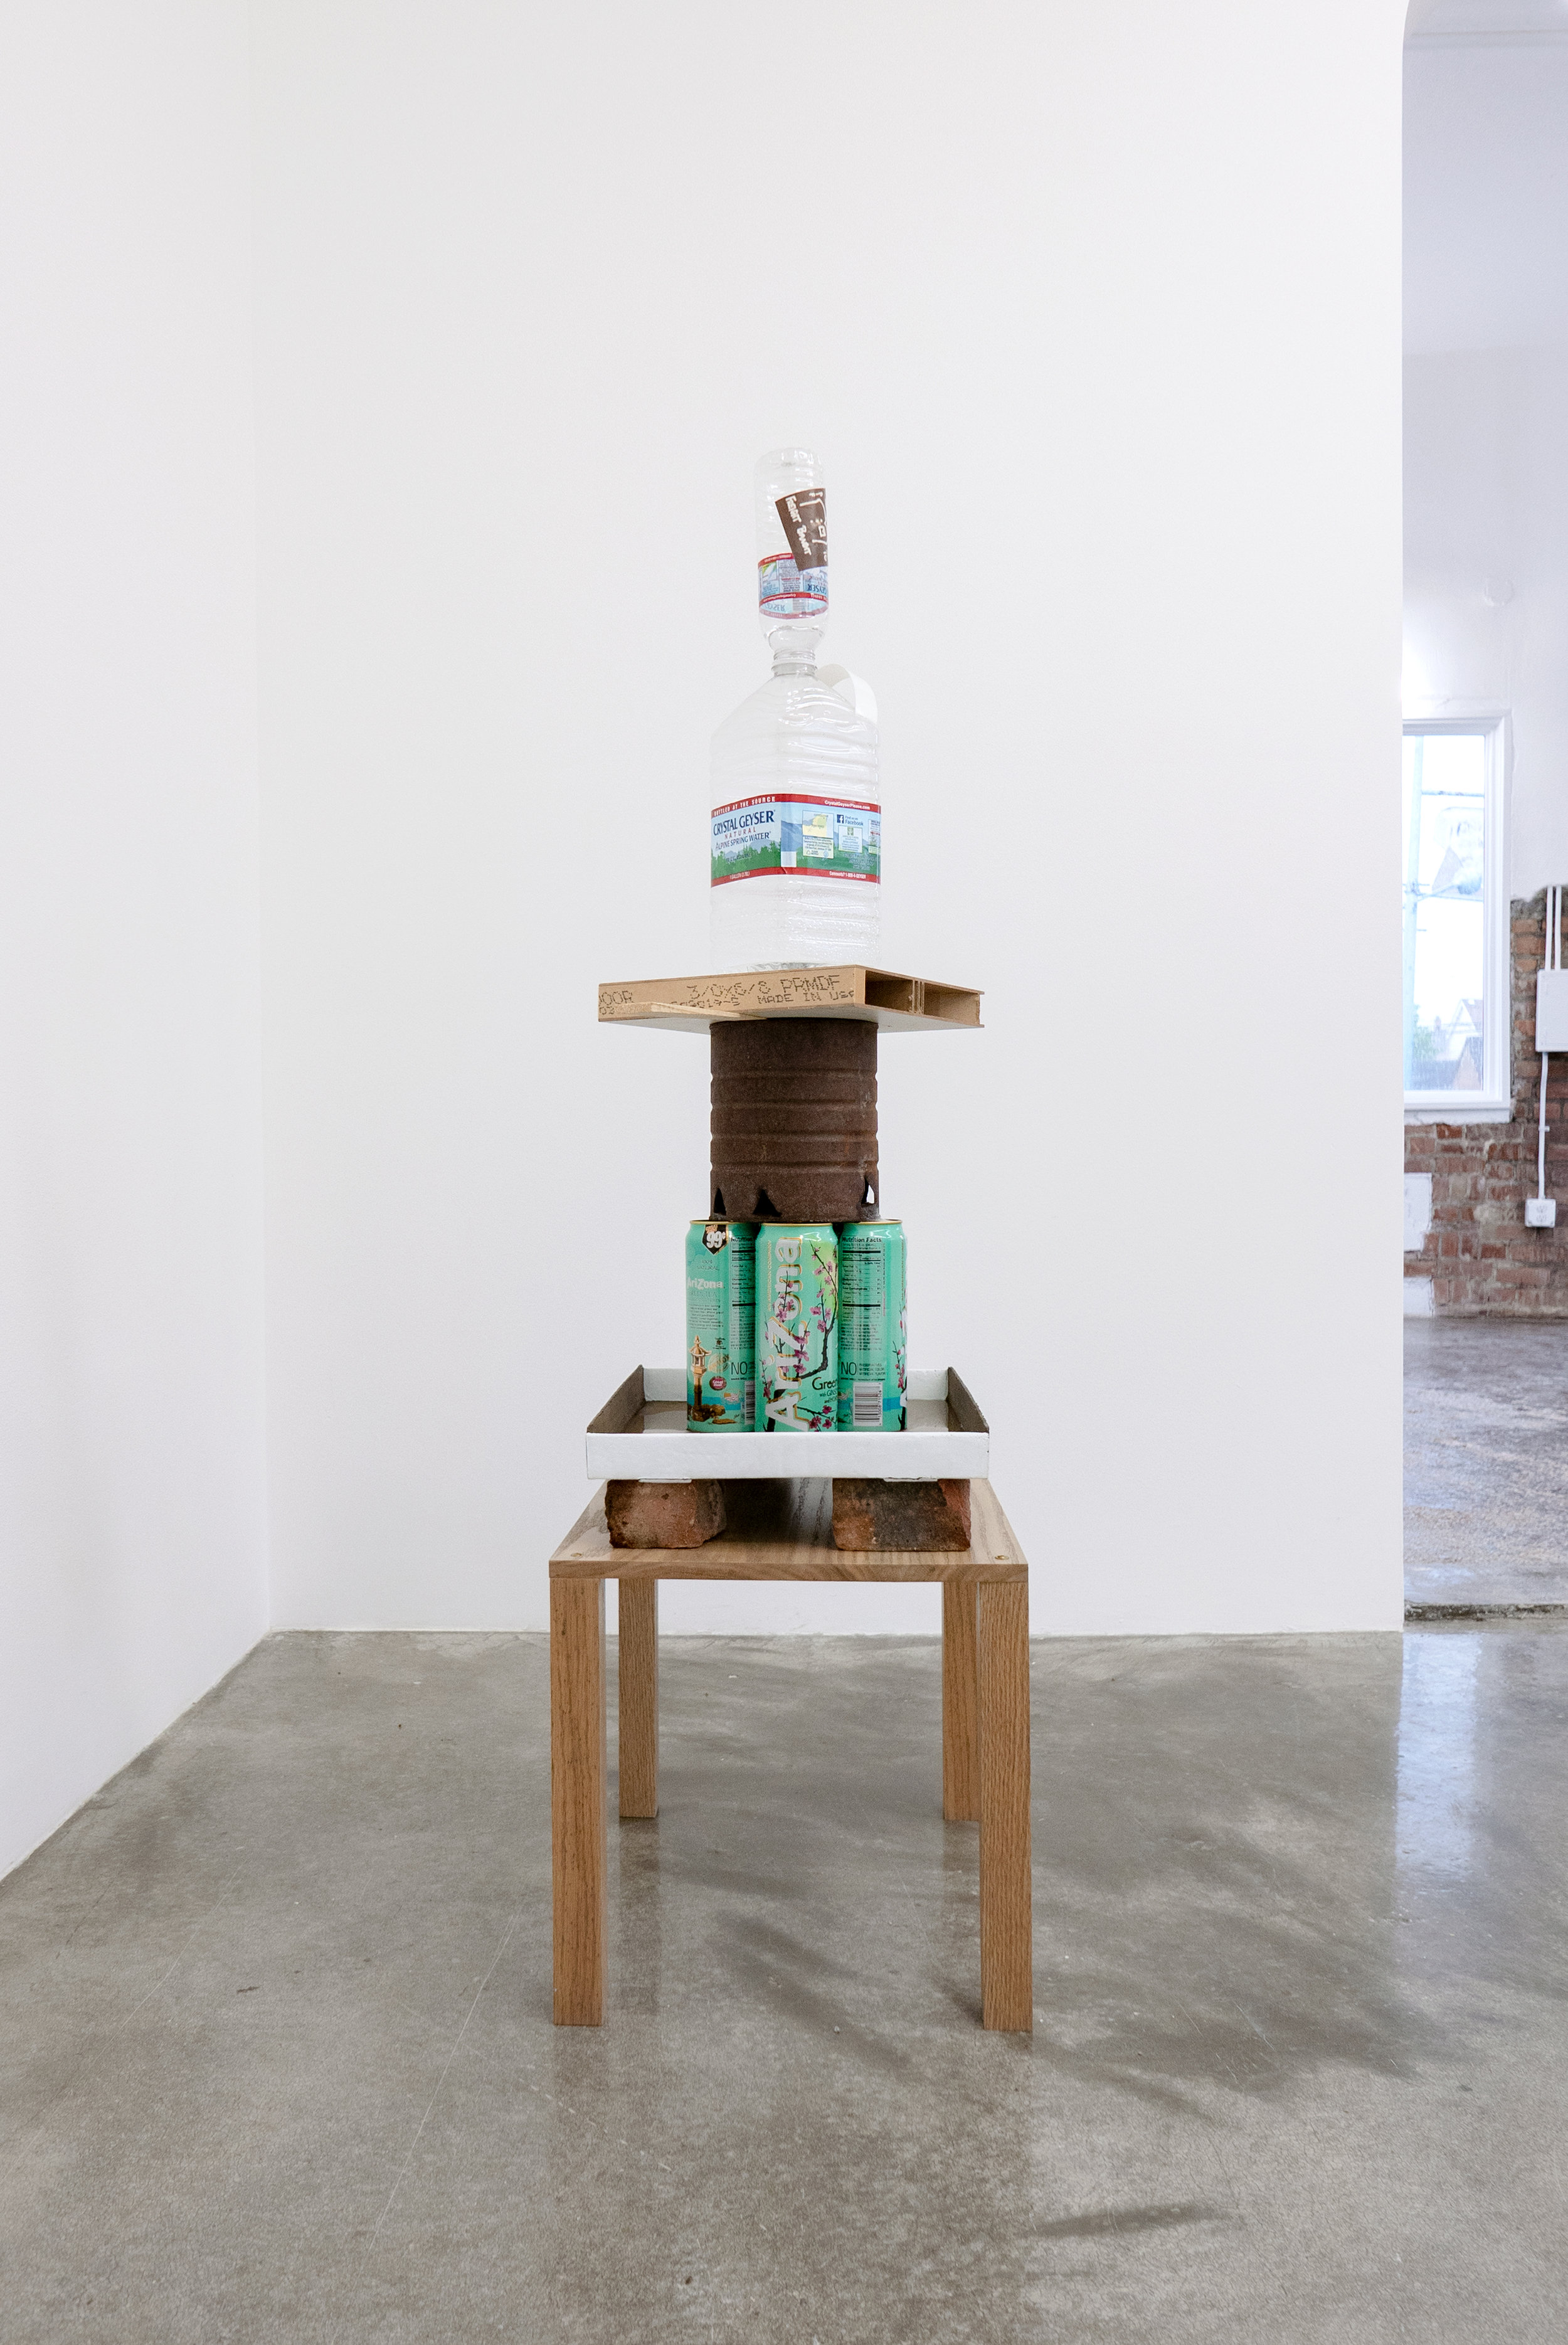  Matt Siegel,  Fountain #1 - CG Roxane East , 2019, Crystal Geyser water (source: Olancha, CA), stickers, quilting pins (sourced: Woodside Quilting, Des Moines, IA), Blue Sky DEF boxes (sourced: Palosade, CO), Crystal Geyser bottle (source: Johnston,